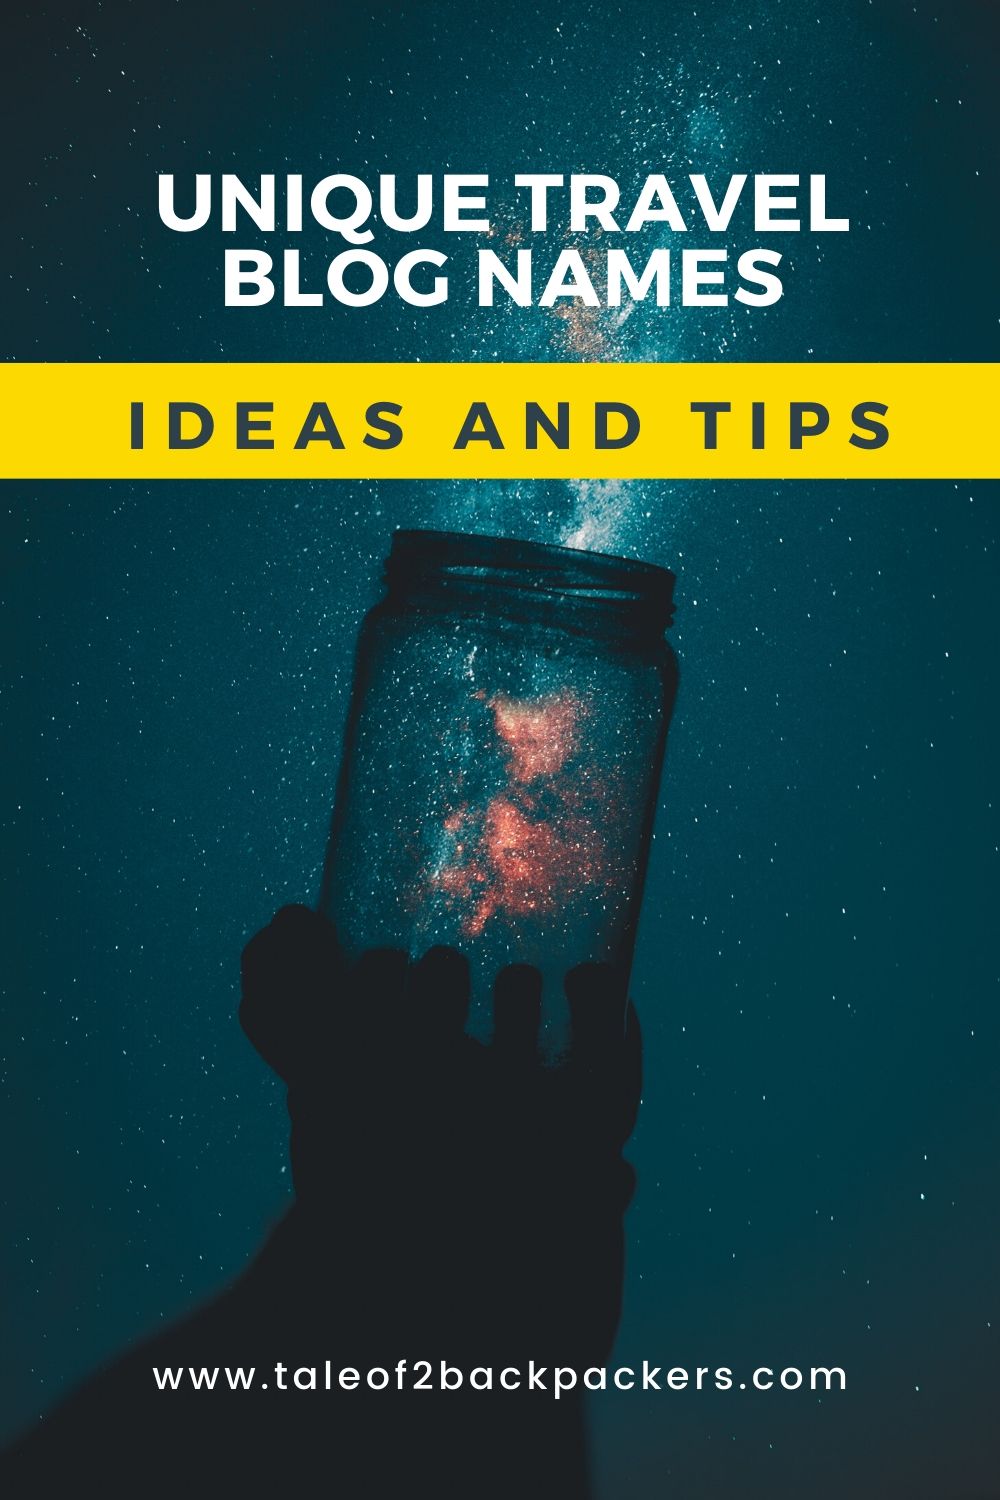 How to choose perfect travel blog names